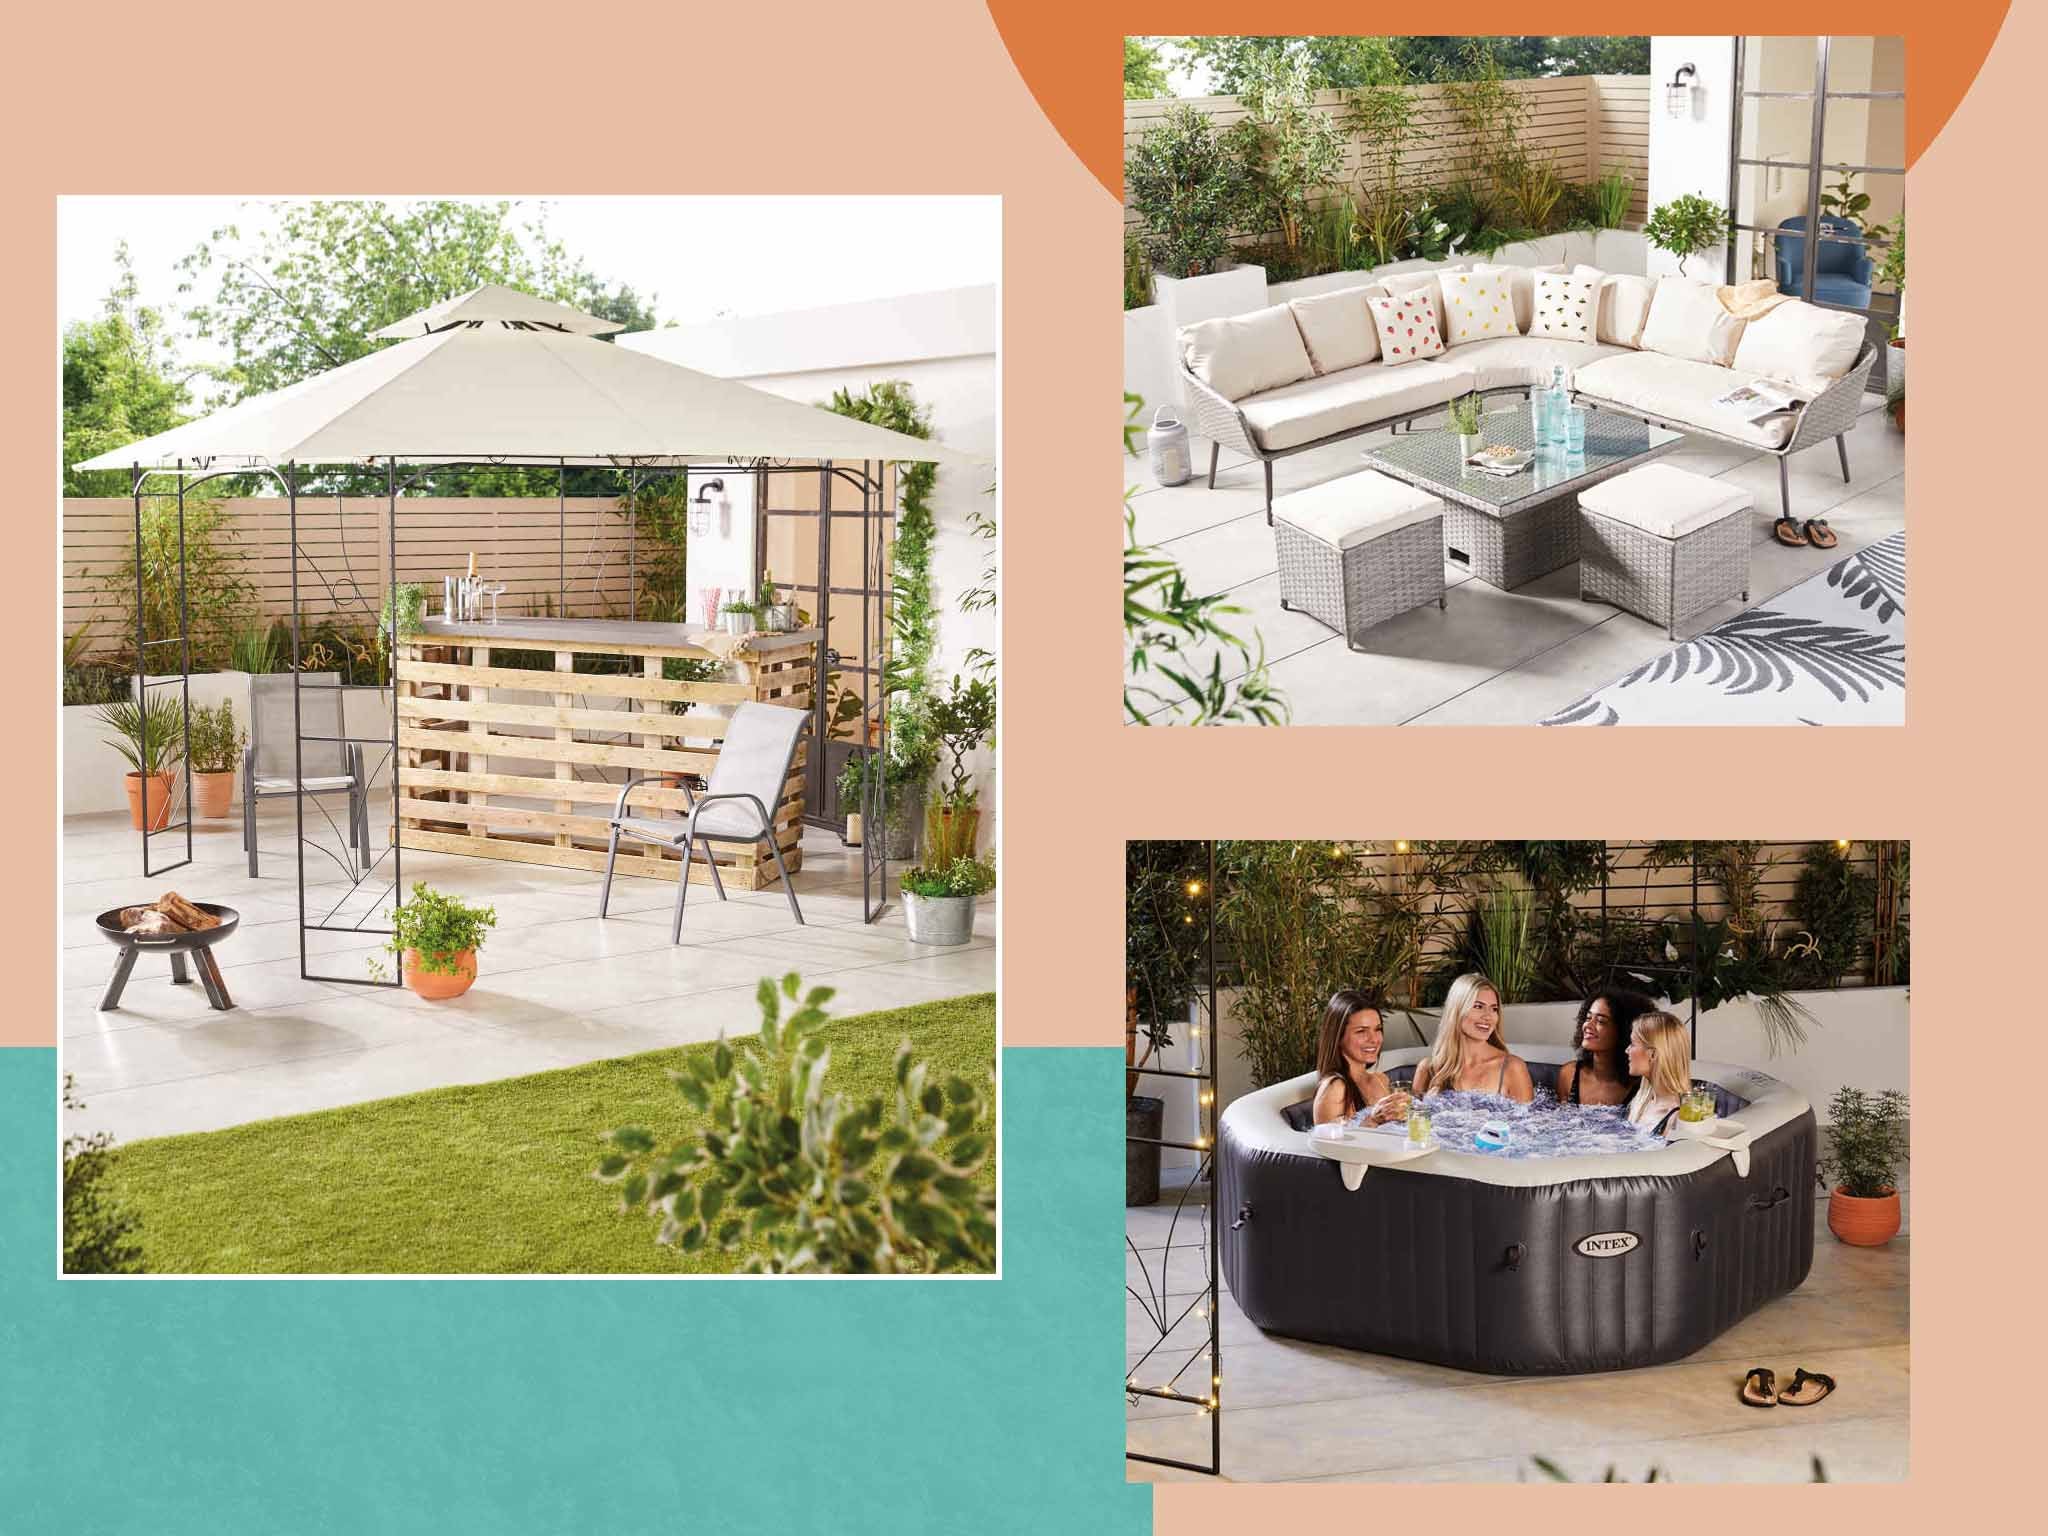 Aldi’s garden furniture is here to spruce up your outdoor space for summer 2022